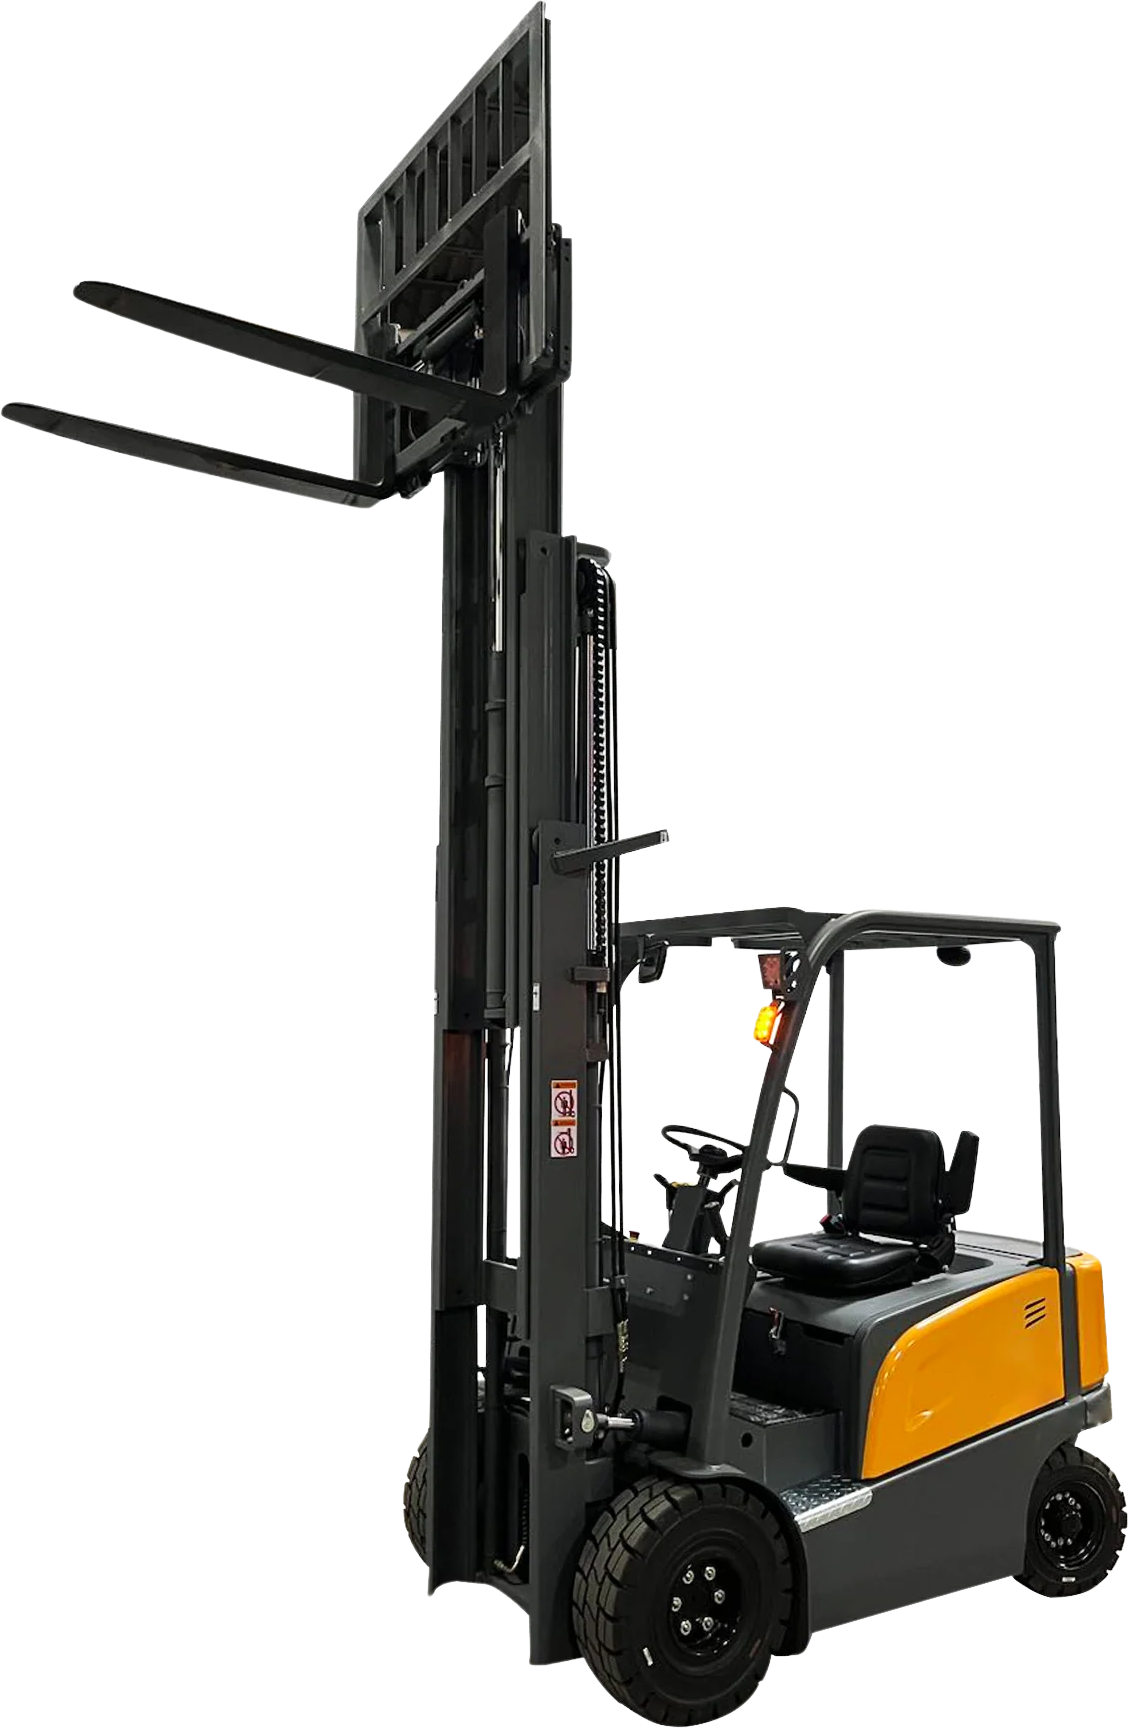 Apollolift, Apollolift A-4004 Electric Forklift Battery Powered 4 Wheel 197" Lifting 5500 lbs. Capacity New